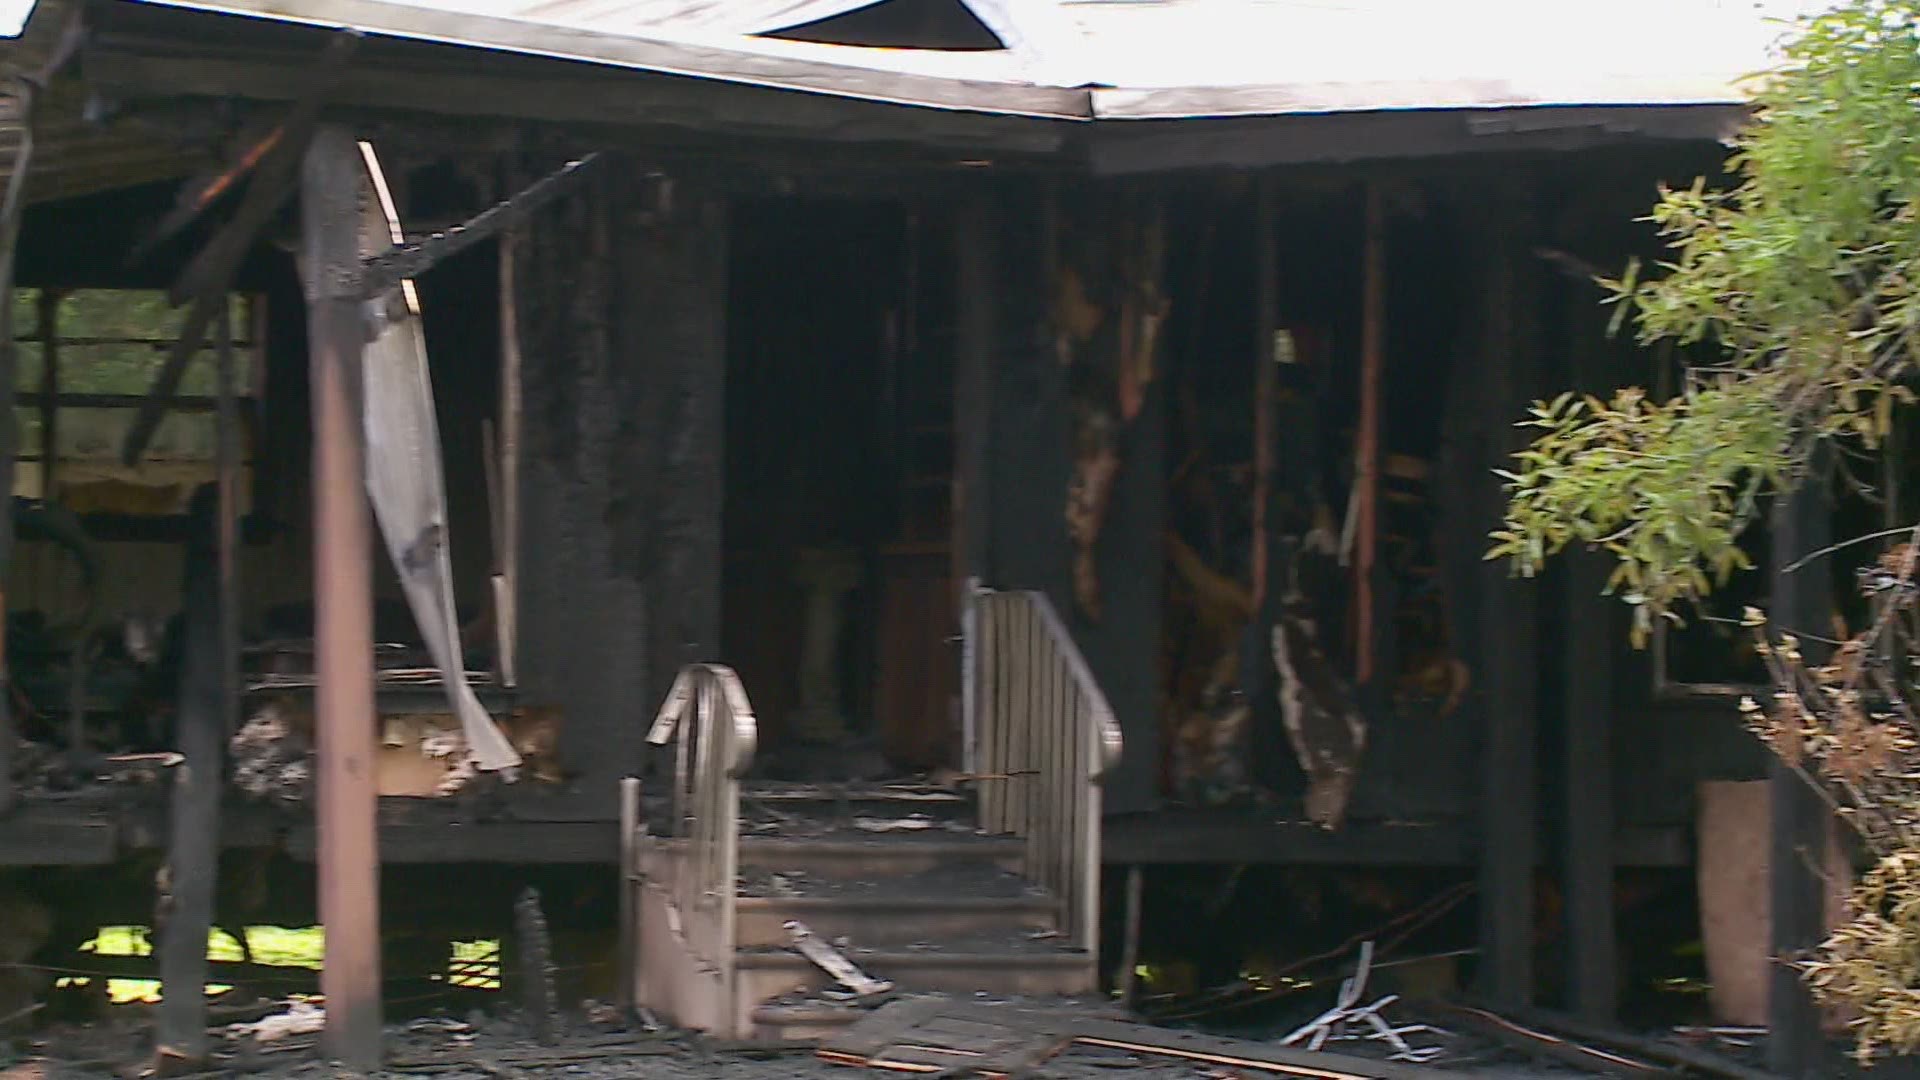 A male was found dead inside of a Hammond home where a fire was reported.